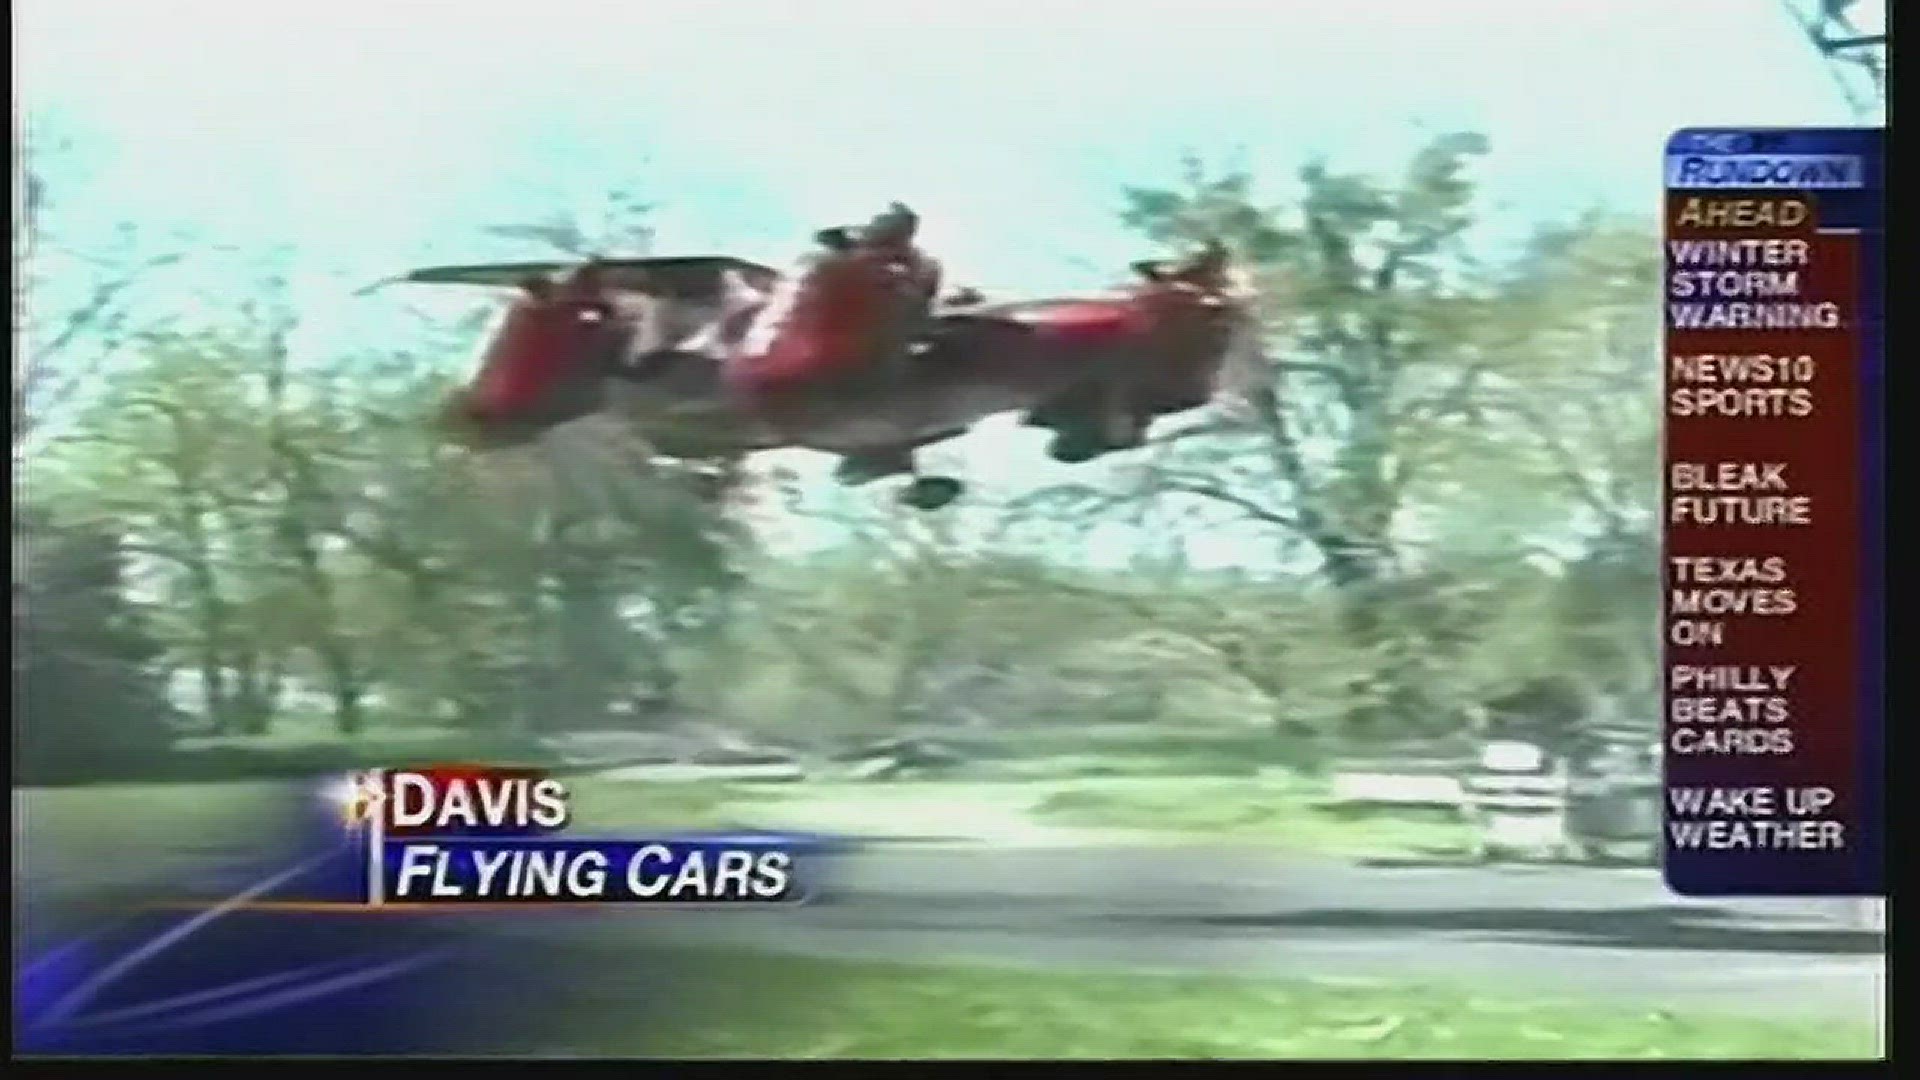 The movie Back to the Future predicted we would all be traveling in flying cars by the year 2015. That didn't happen but an inventor in Davis built a flying car prototype.